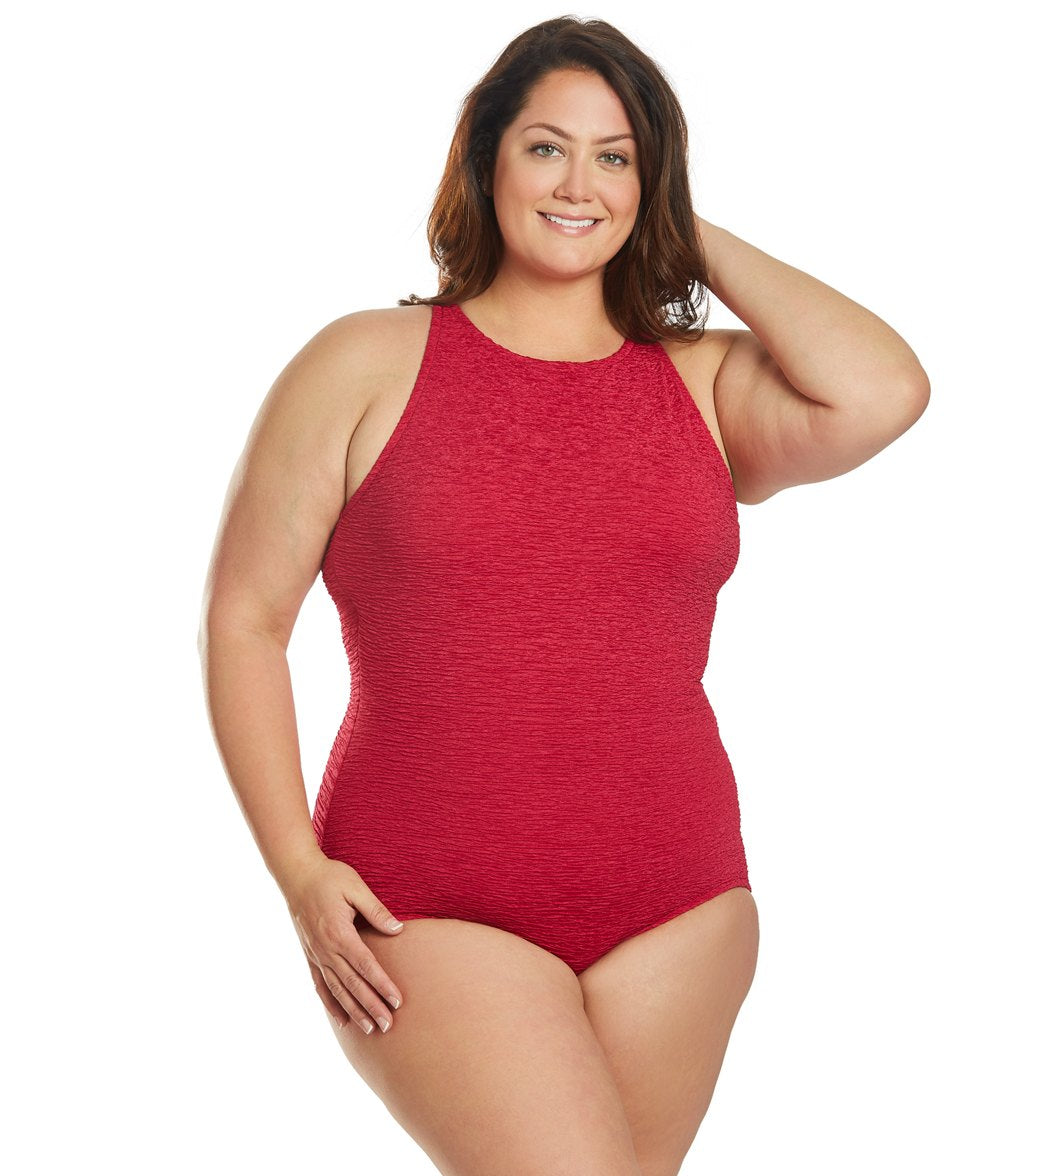 Penbrooke Krinkle Plus Size Chlorine Resistant High Neck One Piece Swimsuit  at SwimOutlet.com